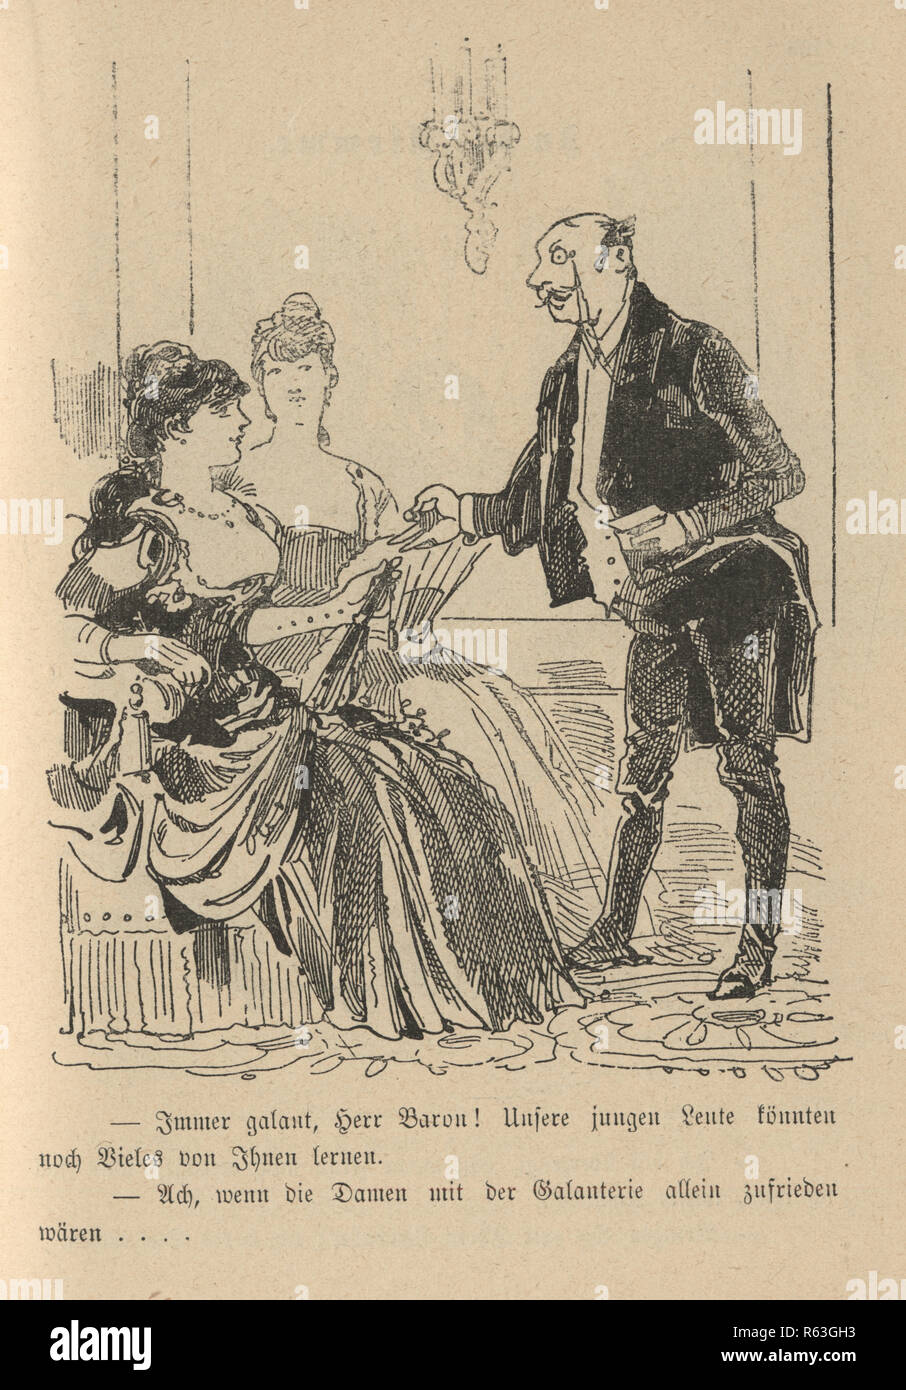 Vintage engraving of a Victorian cartoon of a man wearing a monocle, talking to two woman at a party 19th Century German Stock Photo